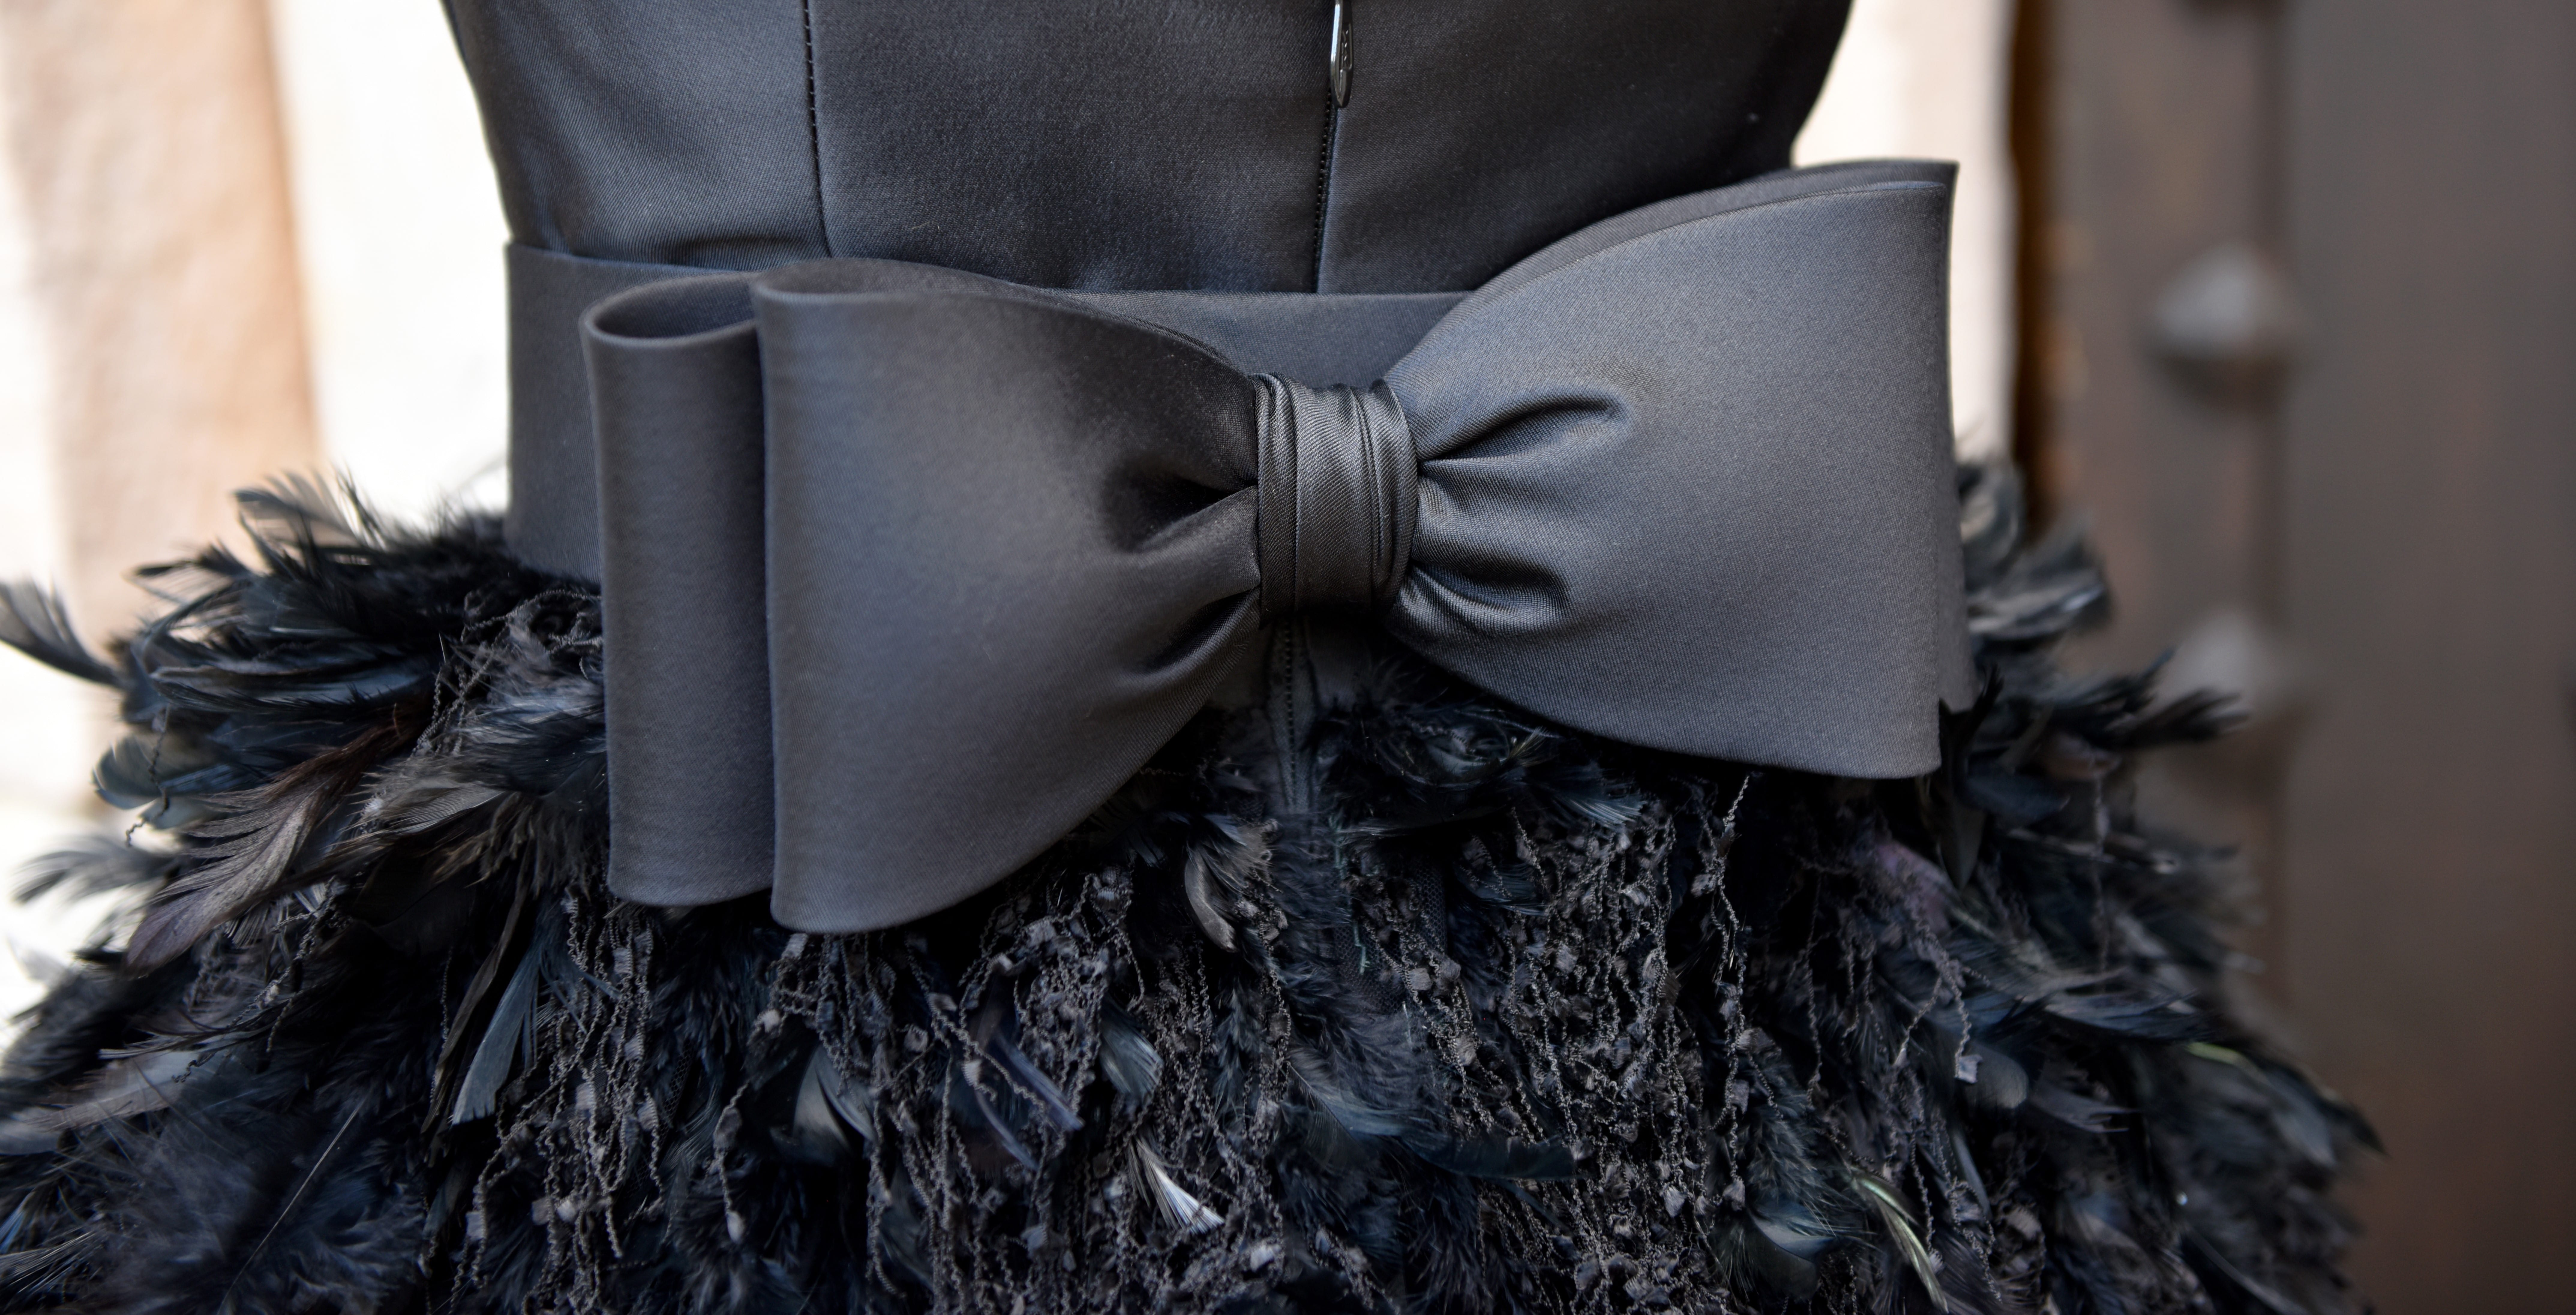 Black dress with big bow and feather details